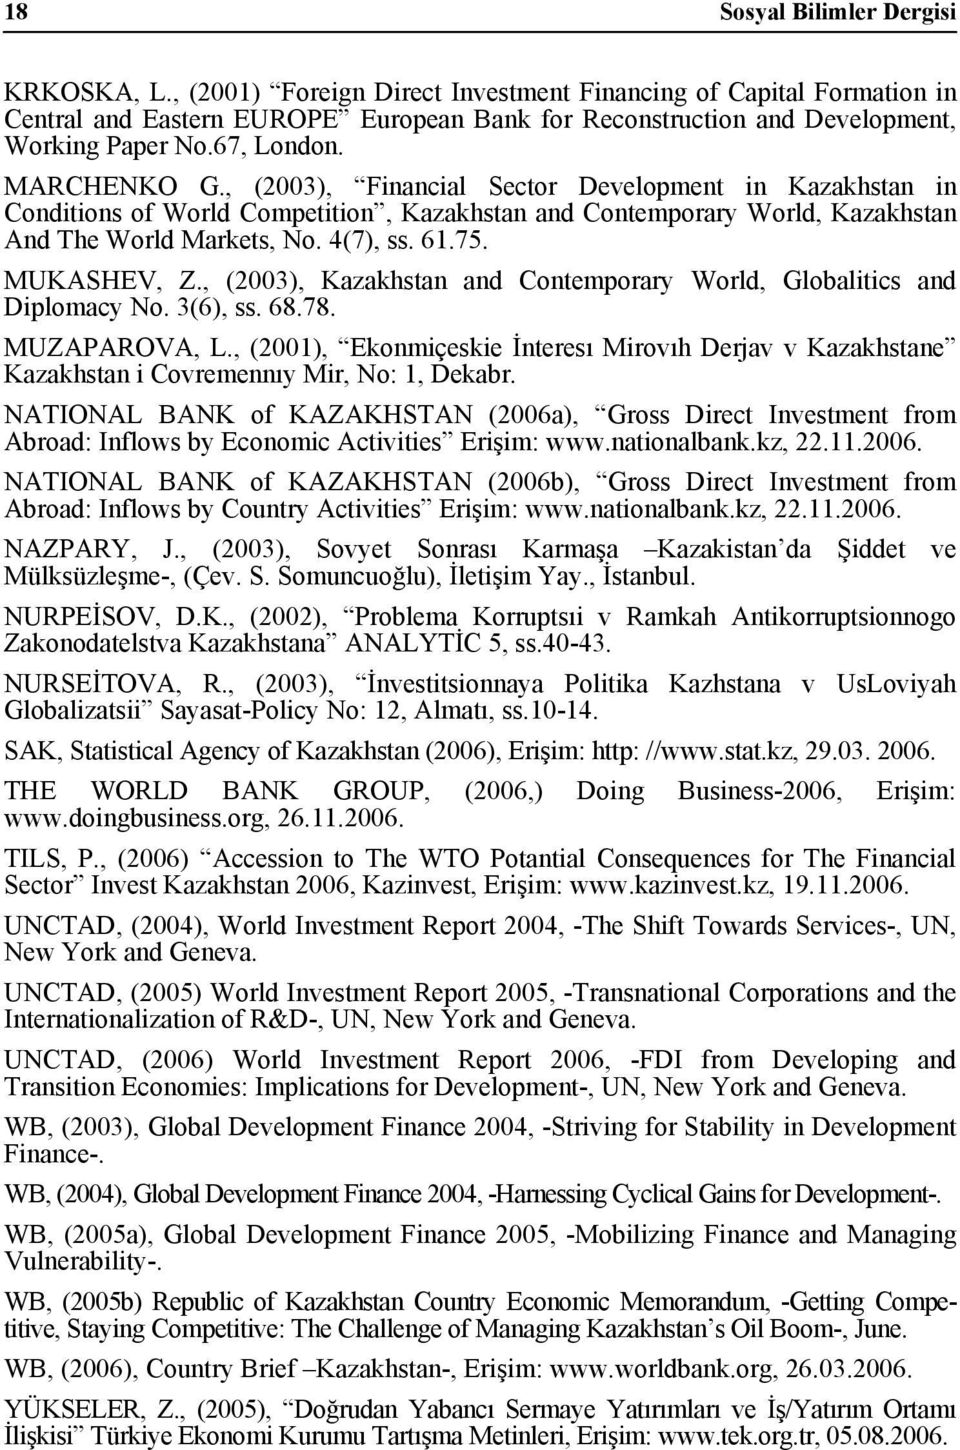 , (2003), Financial Sector Development in Kazakhstan in Conditions of World Competition, Kazakhstan and Contemporary World, Kazakhstan And The World Markets, No. 4(7), ss. 61.75. MUKASHEV, Z.